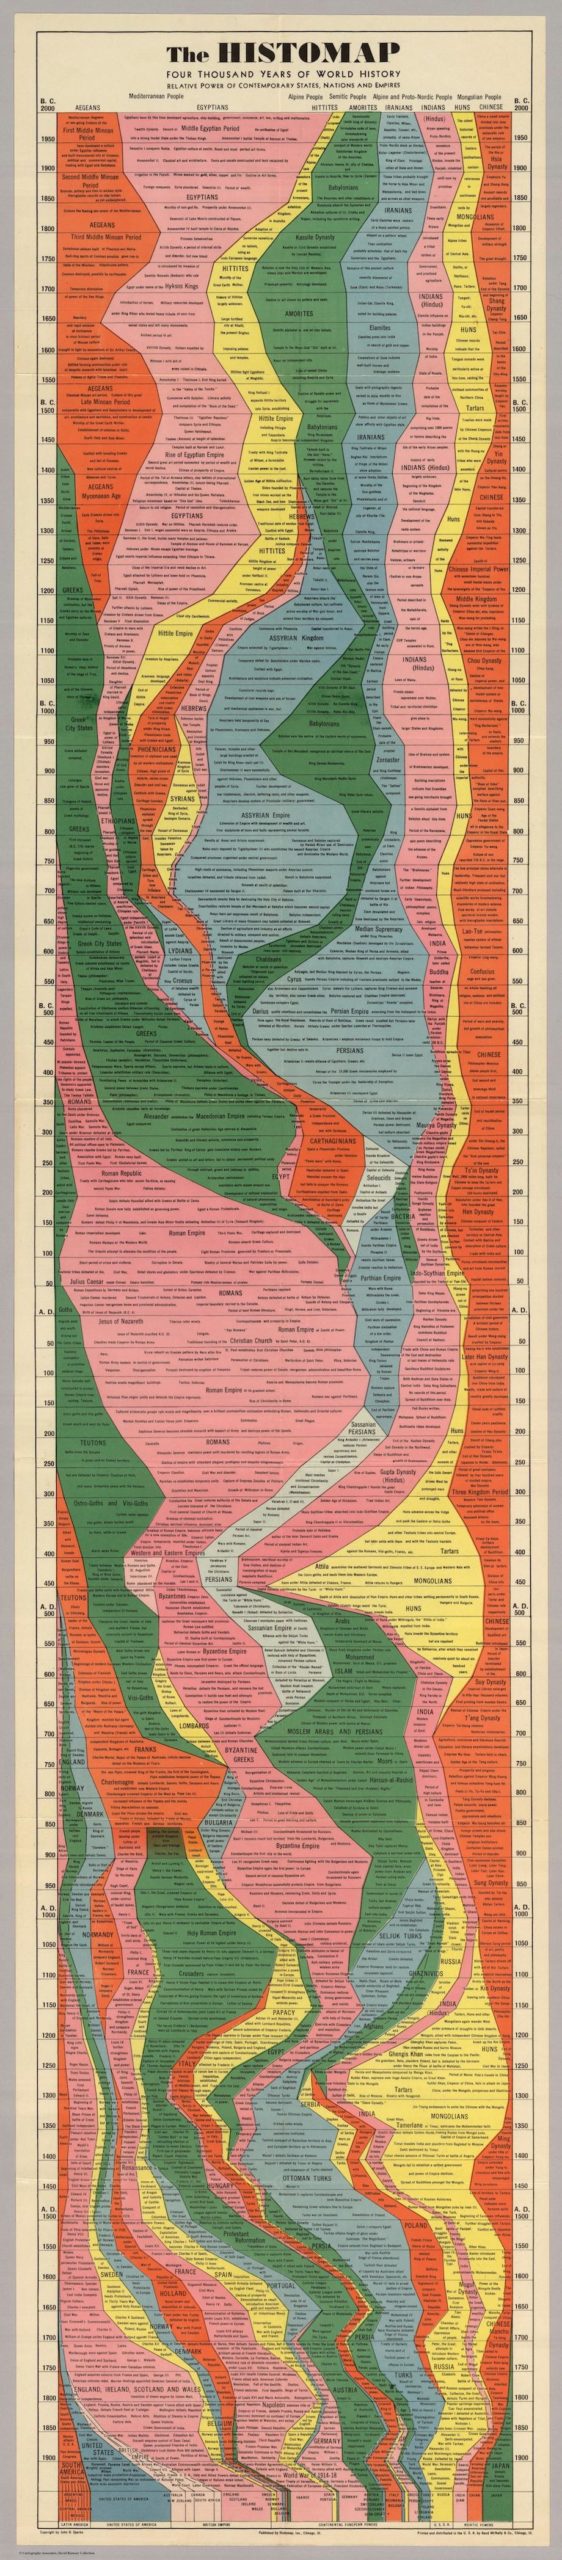 All Hail Histomap: 4000 Years Of History In A Single Poster